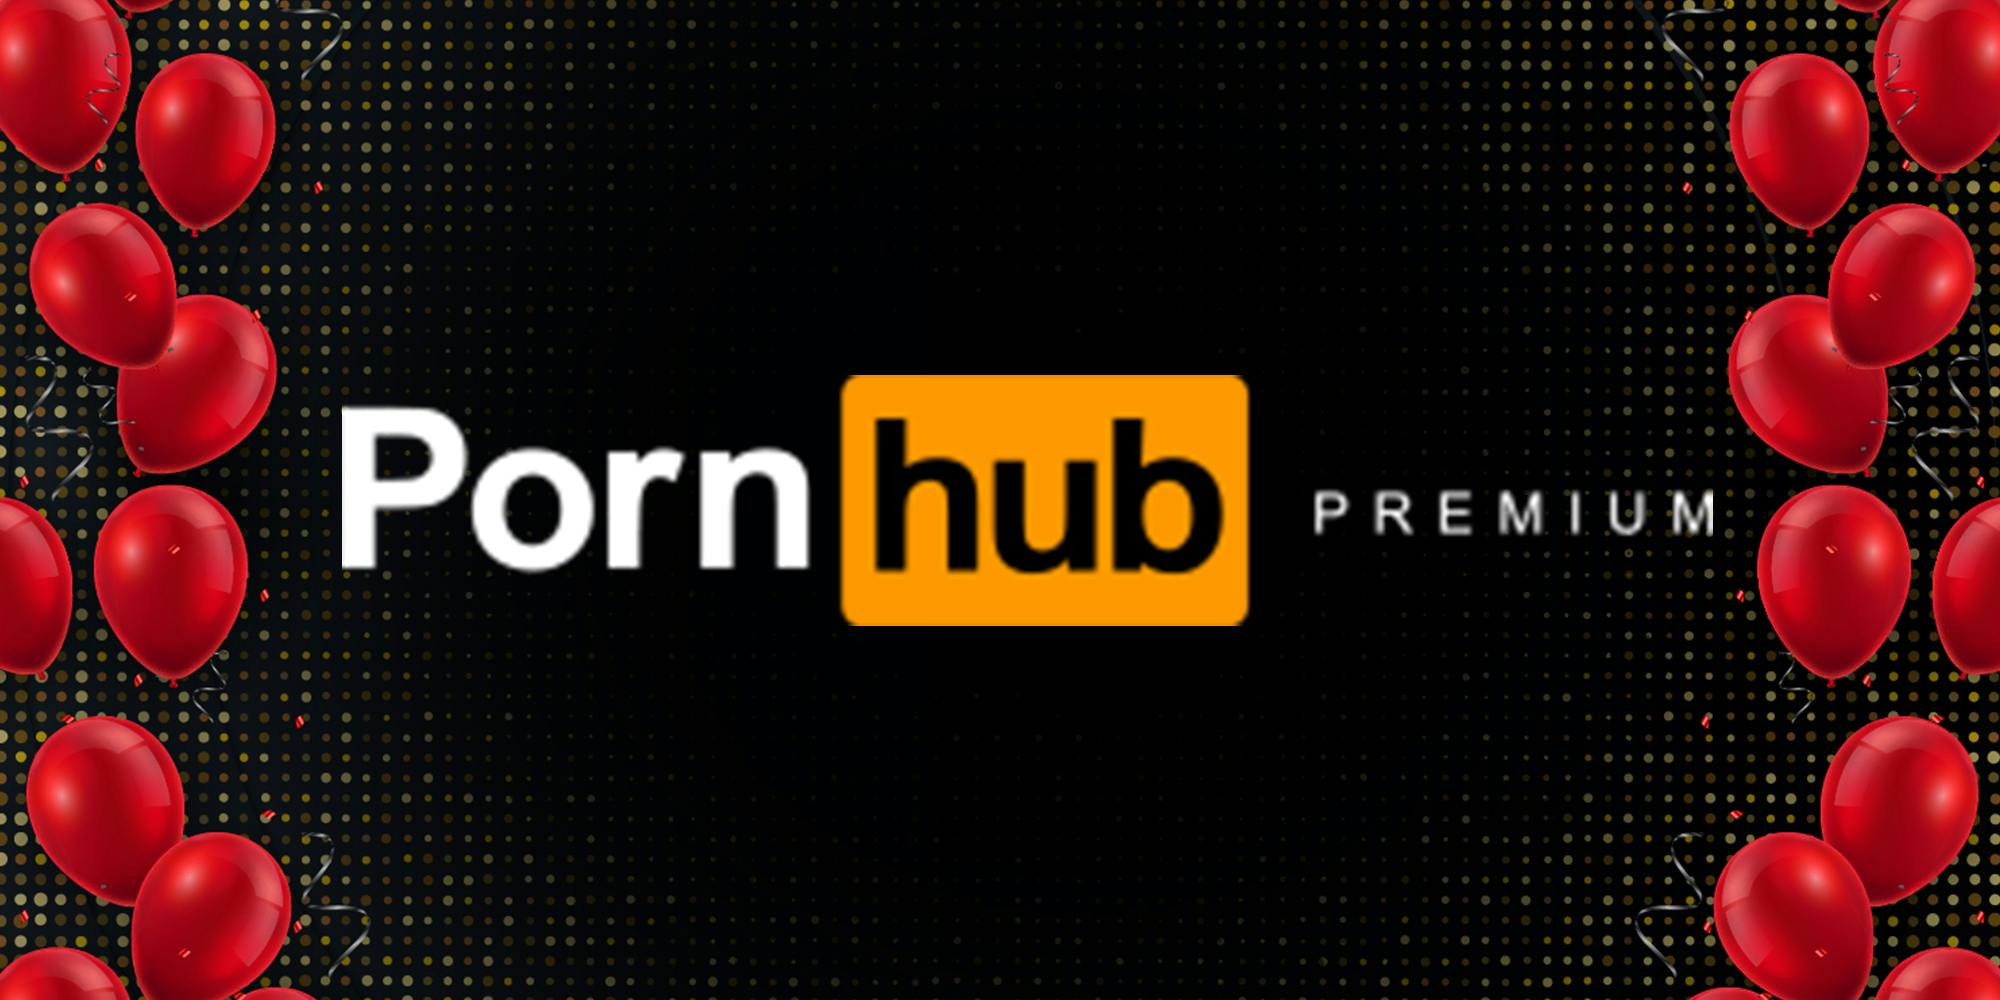 Pornhub beats off the Black Friday competition with a $200 lifetime membership